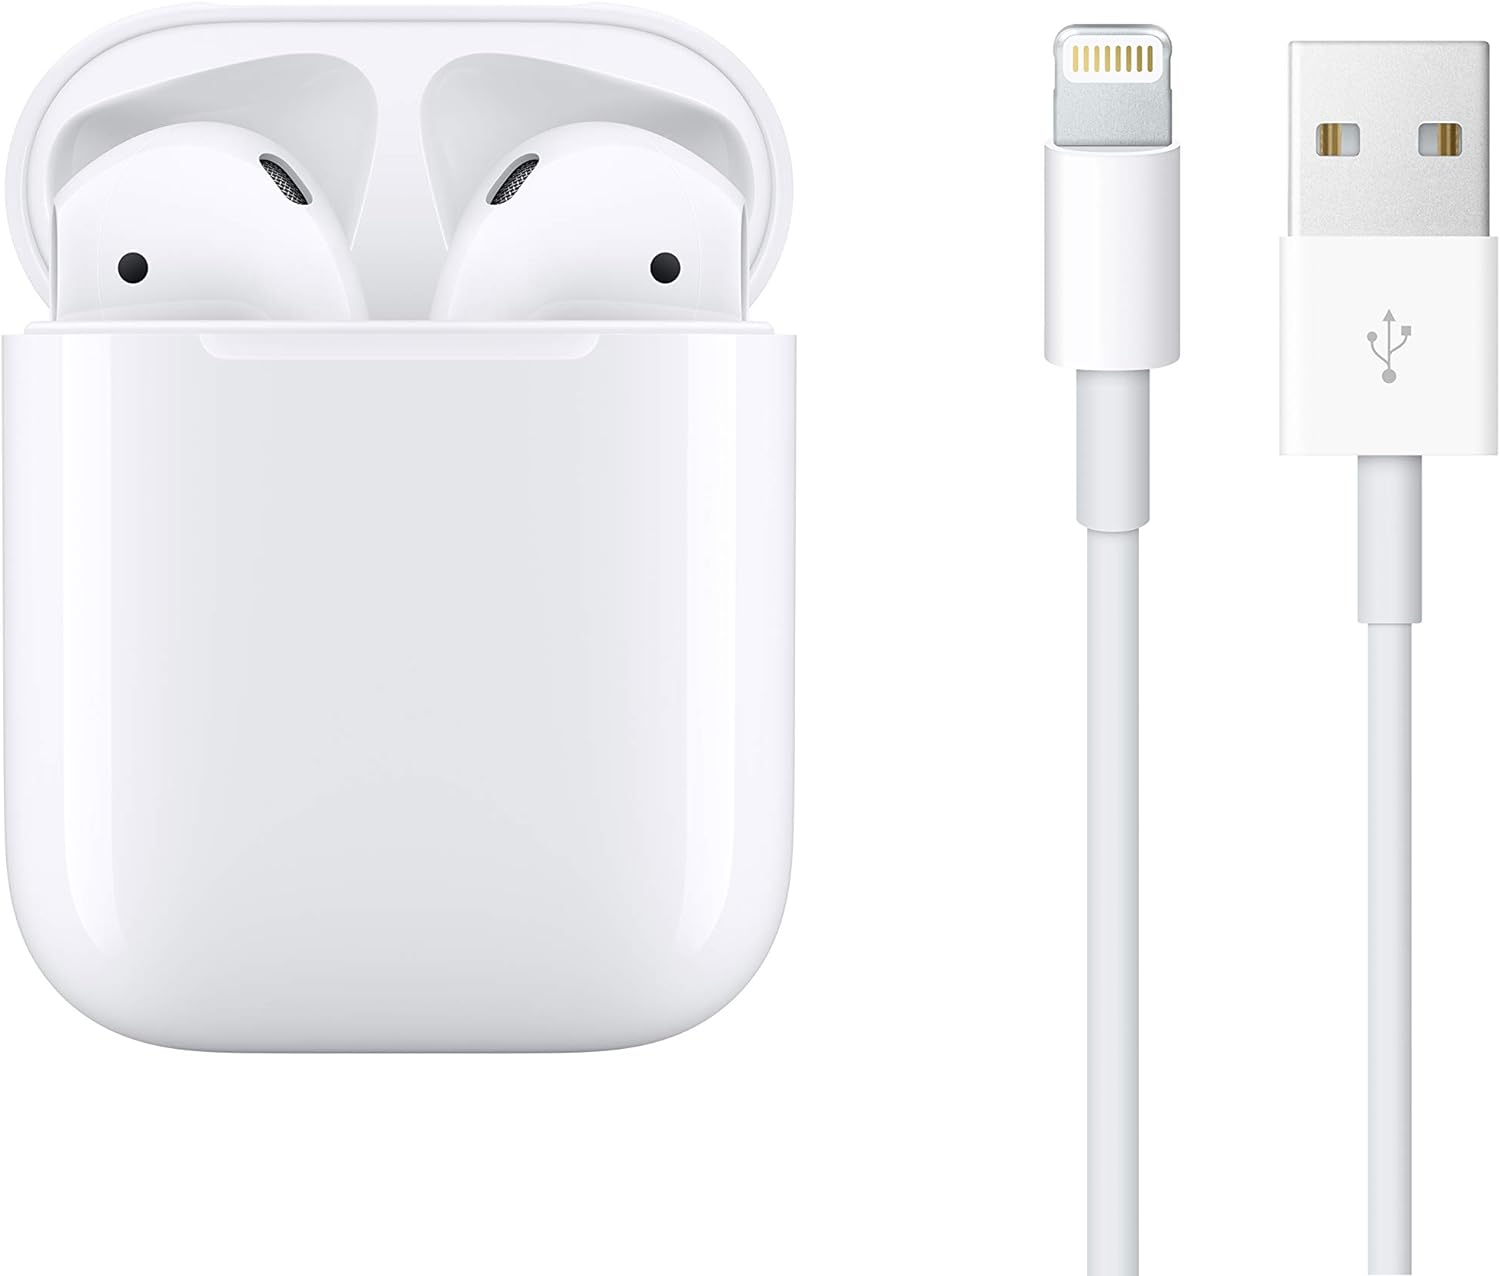 Apple AirPods with Charging Case (2nd Generation) (MV7N2AM/A) - With Cleaning Cloth and USB Power Adapter (Renewed) - Reconditioned